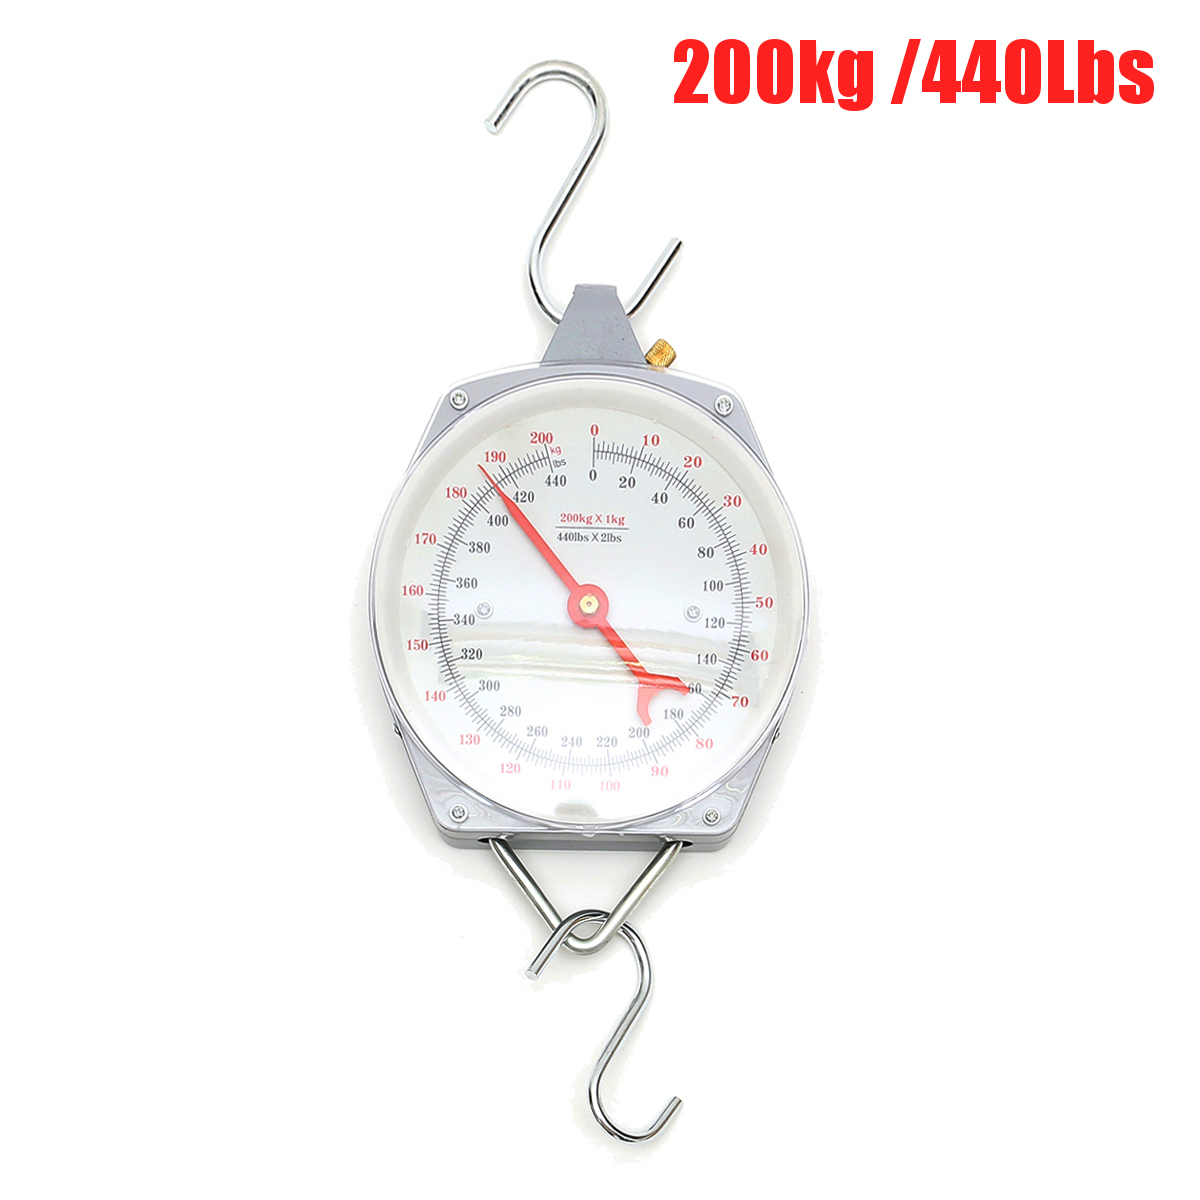 200KG440lbs-Capacity-Hanging-Scales-Mechnical-with-Hook-1156010-1